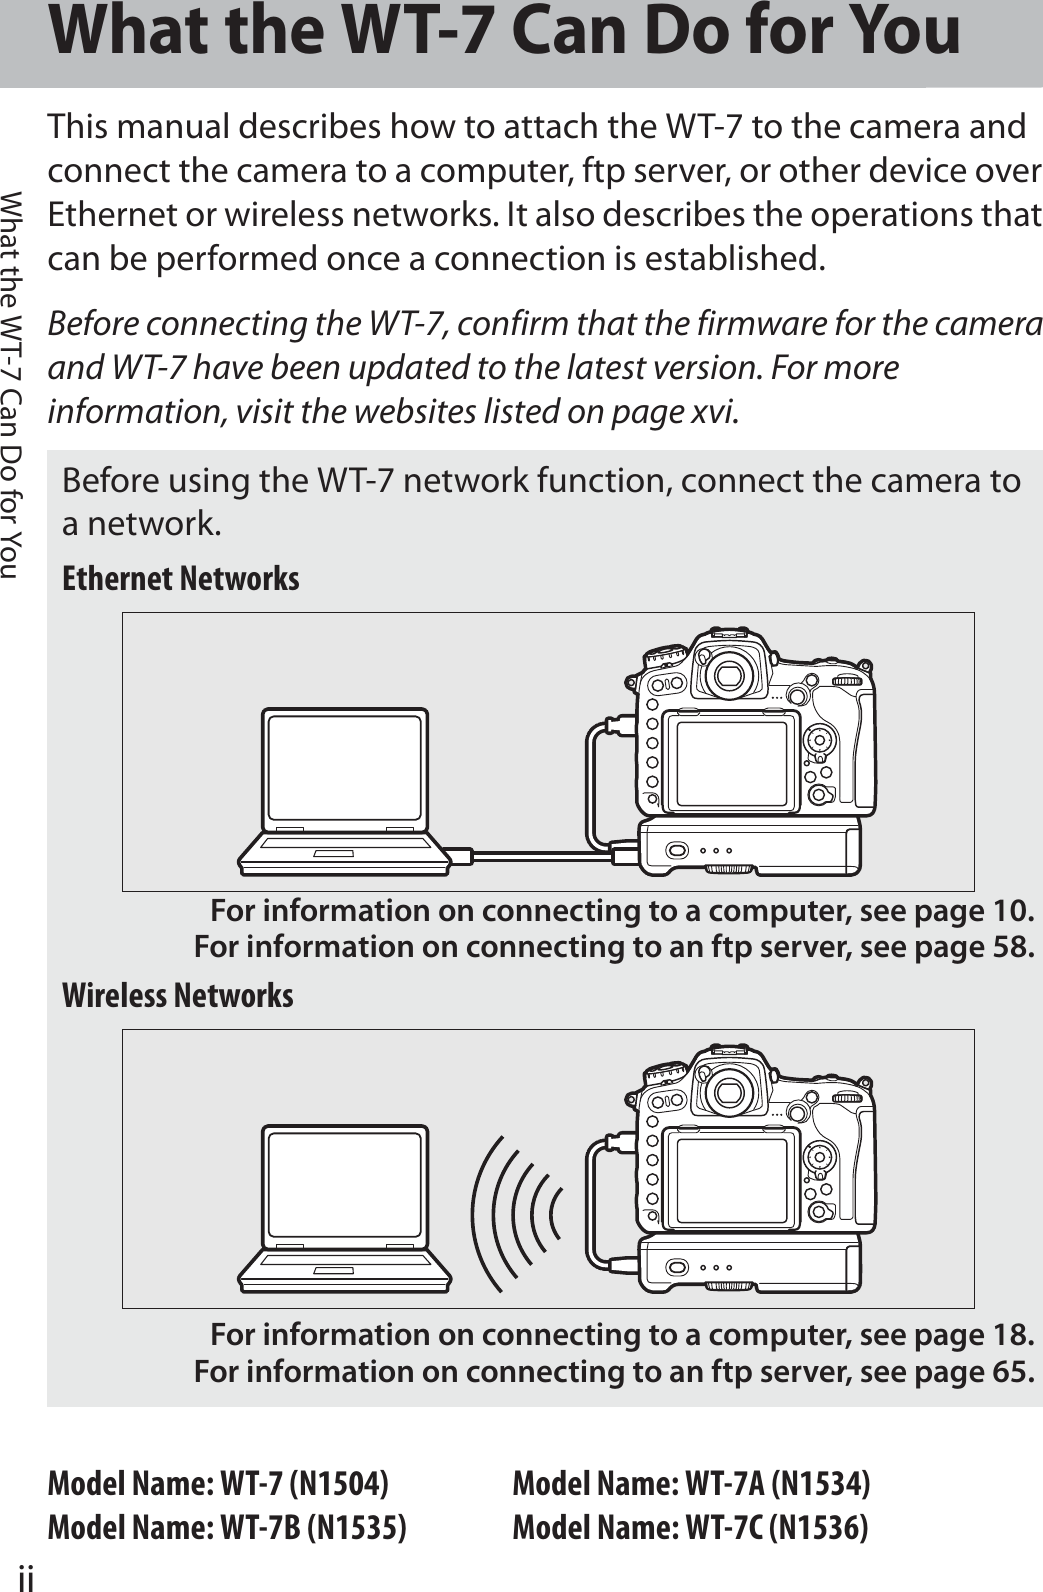 iiWhat the WT-7 Can Do for YouWhat the WT-7 Can Do for YouThis manual describes how to attach the WT-7 to the camera and connect the camera to a computer, ftp server, or other device over Ethernet or wireless networks. It also describes the operations that can be performed once a connection is established.Before connecting the WT-7, confirm that the firmware for the camera and WT-7 have been updated to the latest version. For more information, visit the websites listed on page xvi.Model Name: WT-7 (N1504) Model Name: WT-7A (N1534)Model Name: WT-7B (N1535) Model Name: WT-7C (N1536)Before using the WT-7 network function, connect the camera to a network.Ethernet NetworksFor information on connecting to a computer, see page 10.For information on connecting to an ftp server, see page 58.Wireless NetworksFor information on connecting to a computer, see page 18.For information on connecting to an ftp server, see page 65.